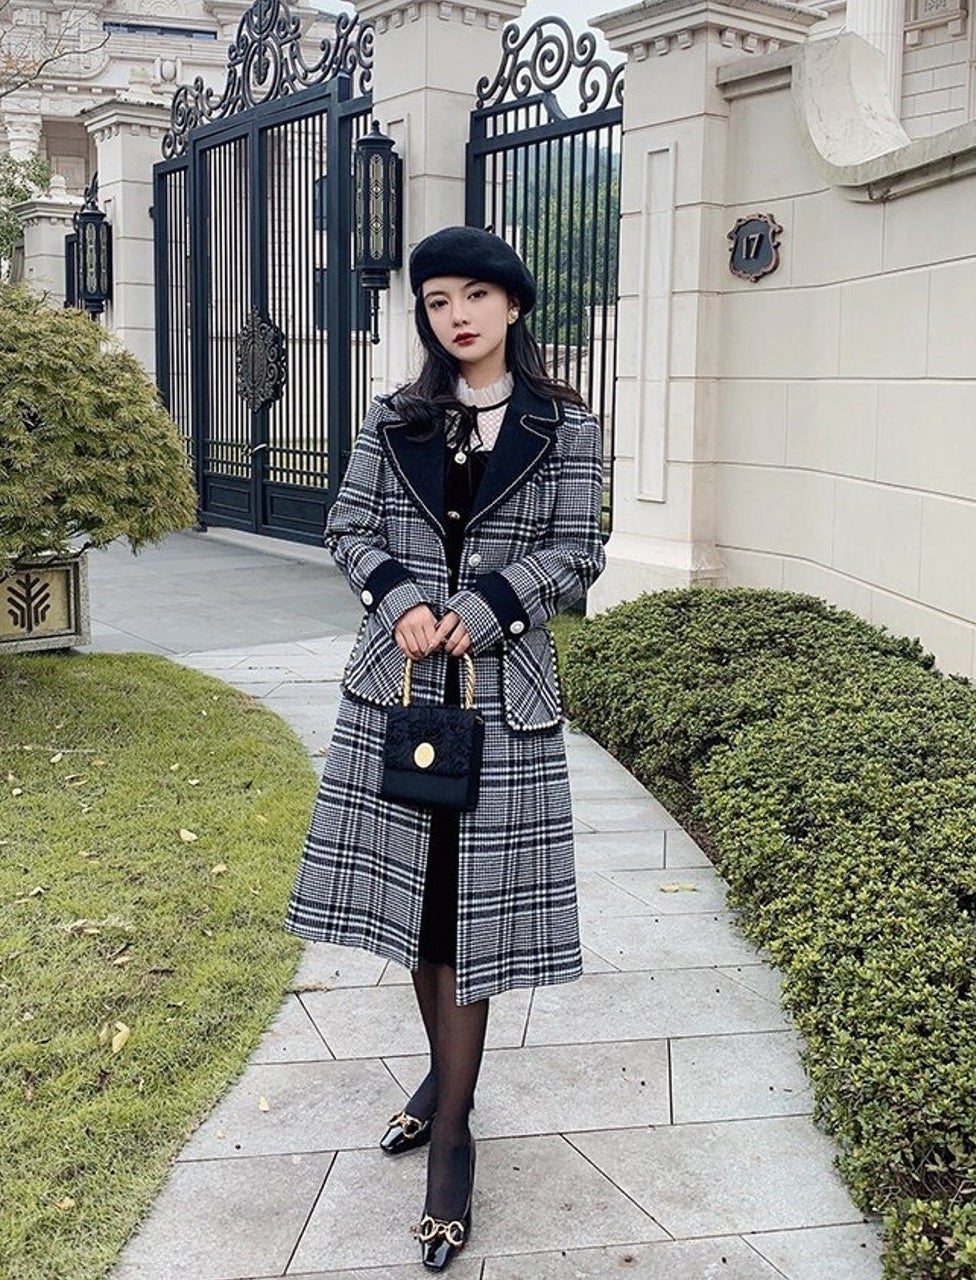 model in black and gray plaid coat with piping on collar and pockets